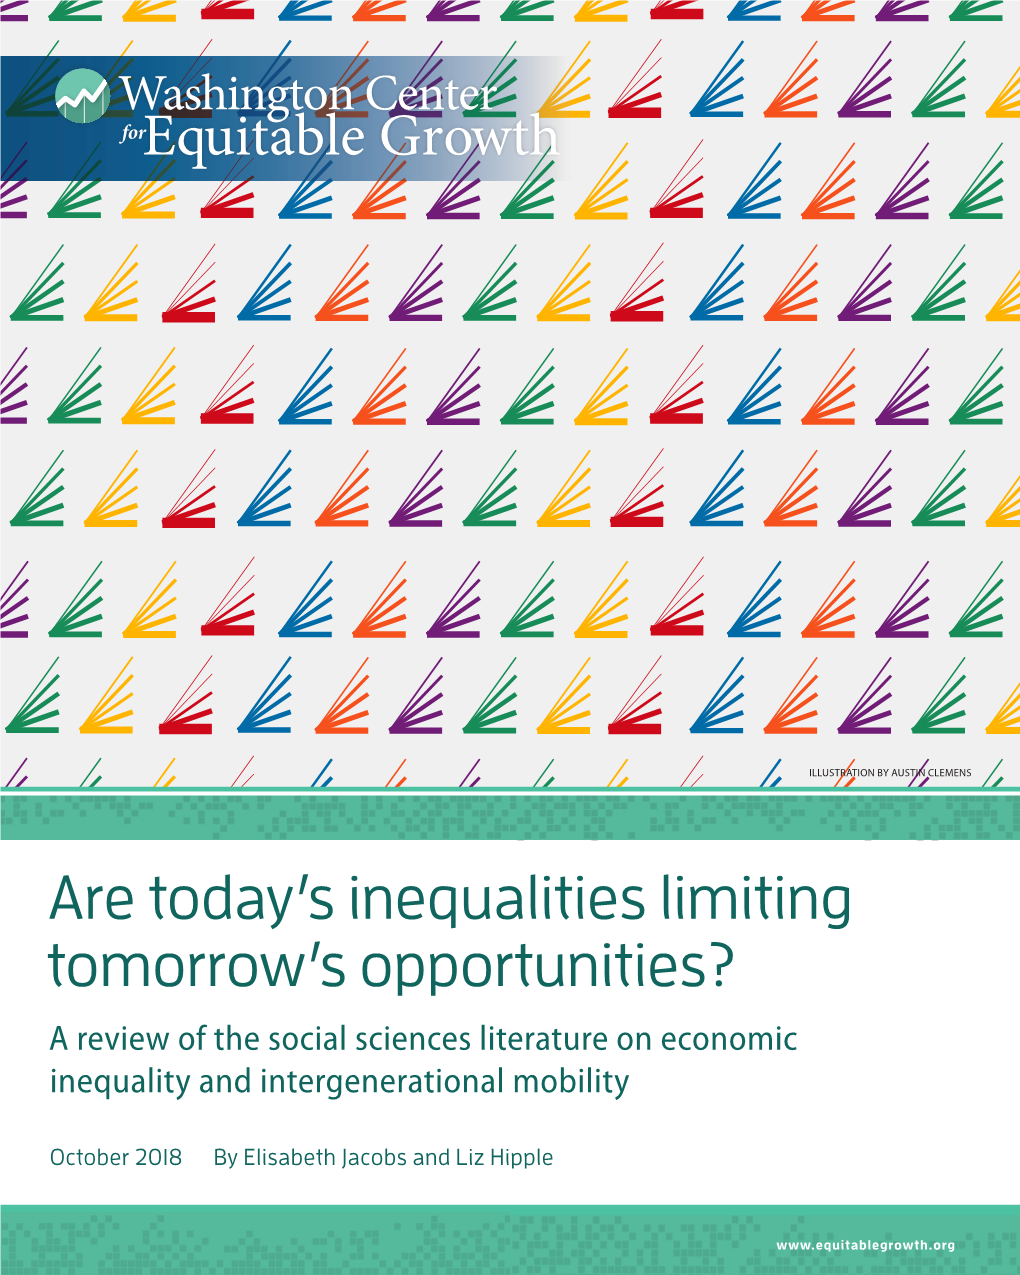 Download File Are Today's Inequalities Limiting Tomorrow's Opportunities?